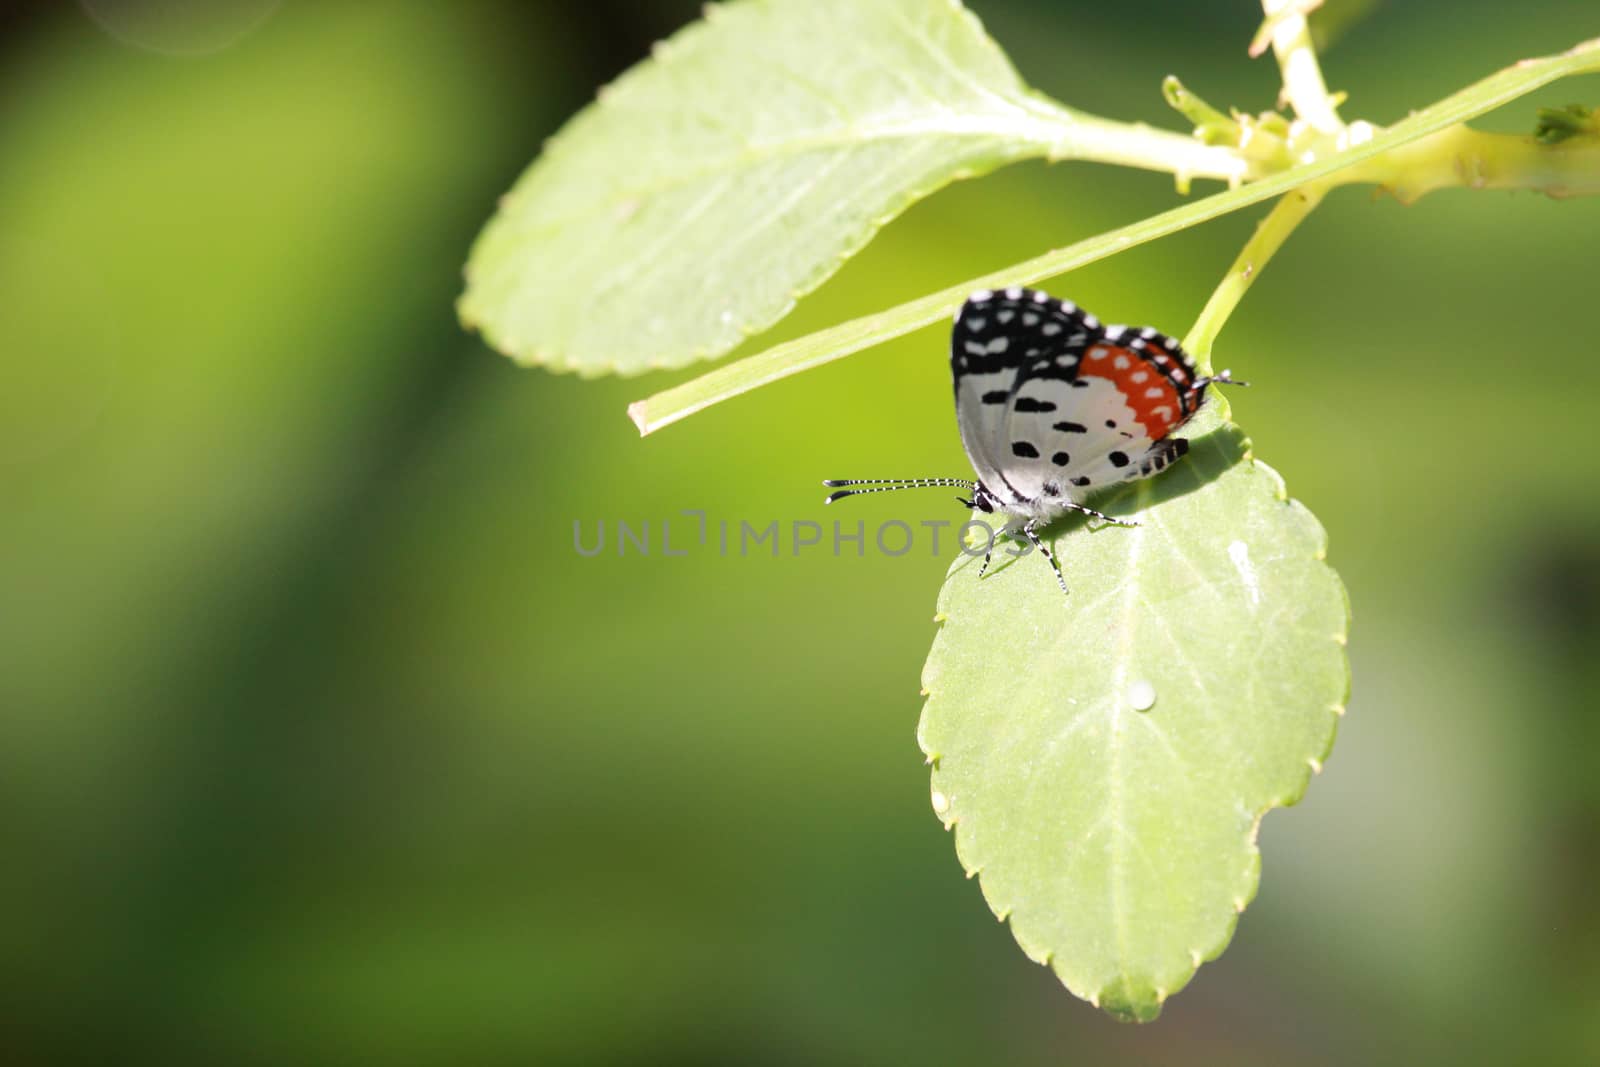 A cute little butterly with wings in white and orange with black spots, on a leaf.